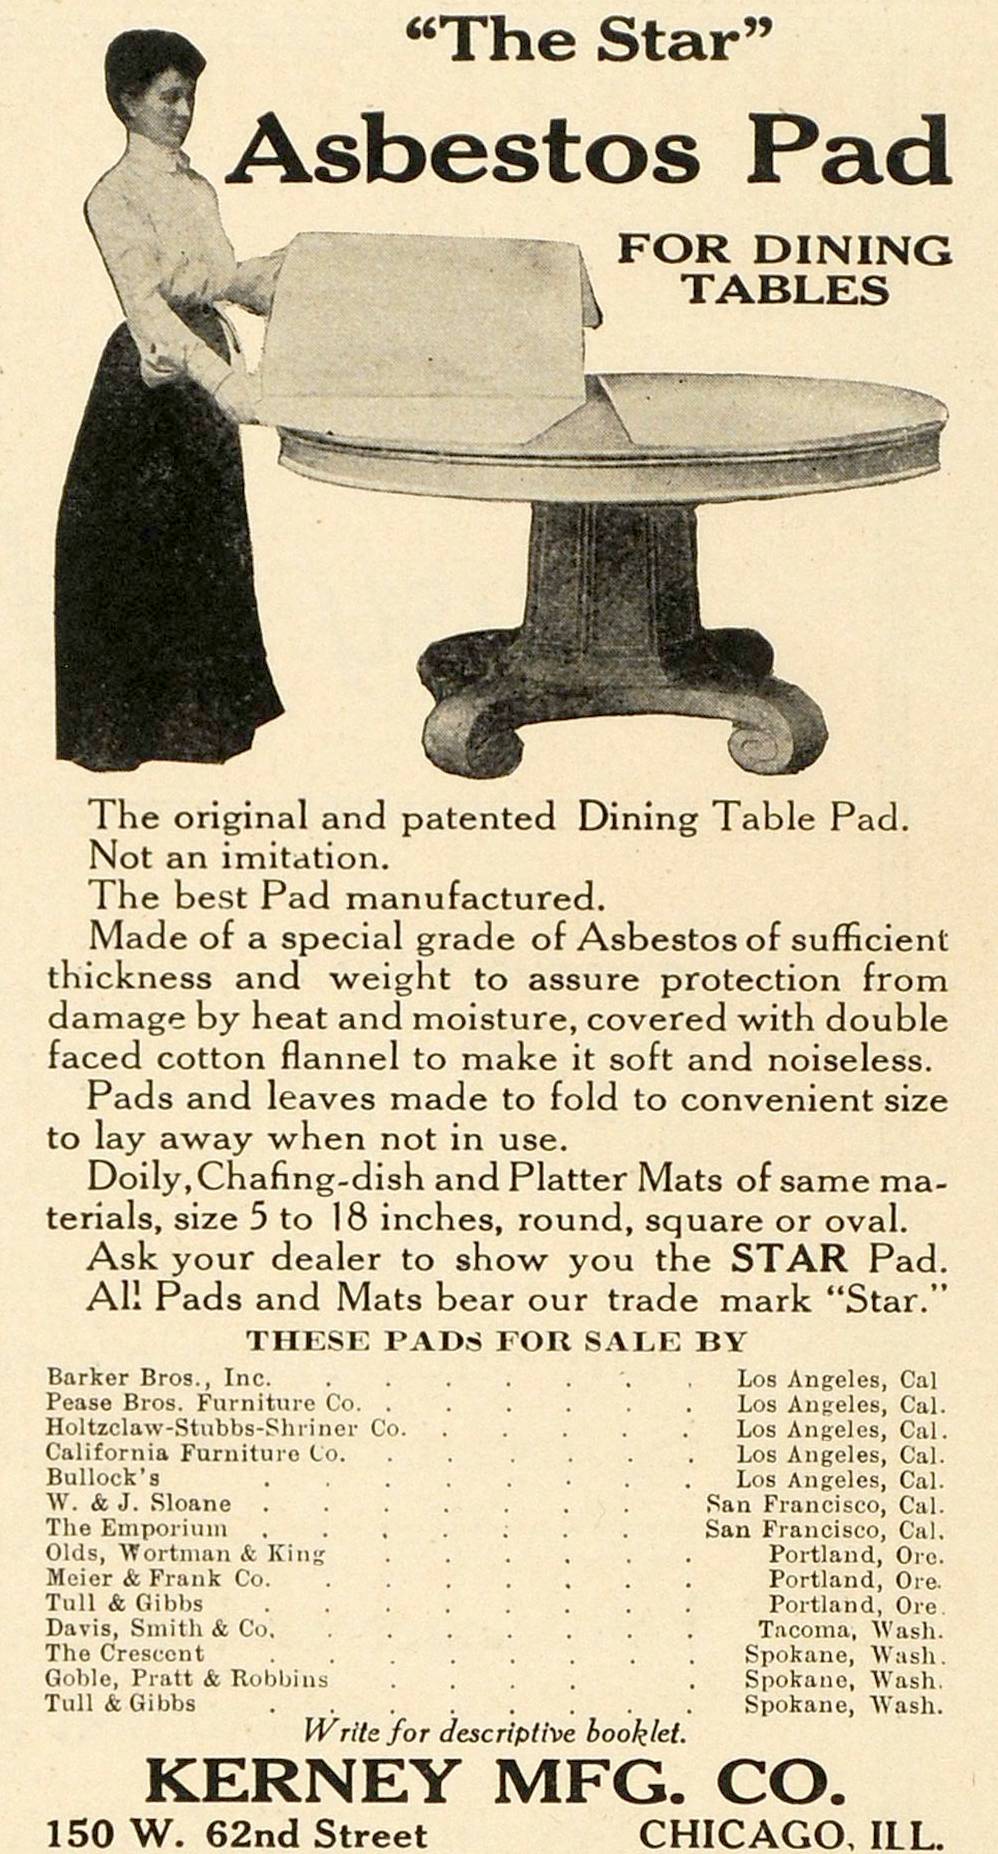 ad-chicago-kenney-manufacturing-150-w-62nd-the-star-asbestos-pad-for-dining-tables-1911.jpg